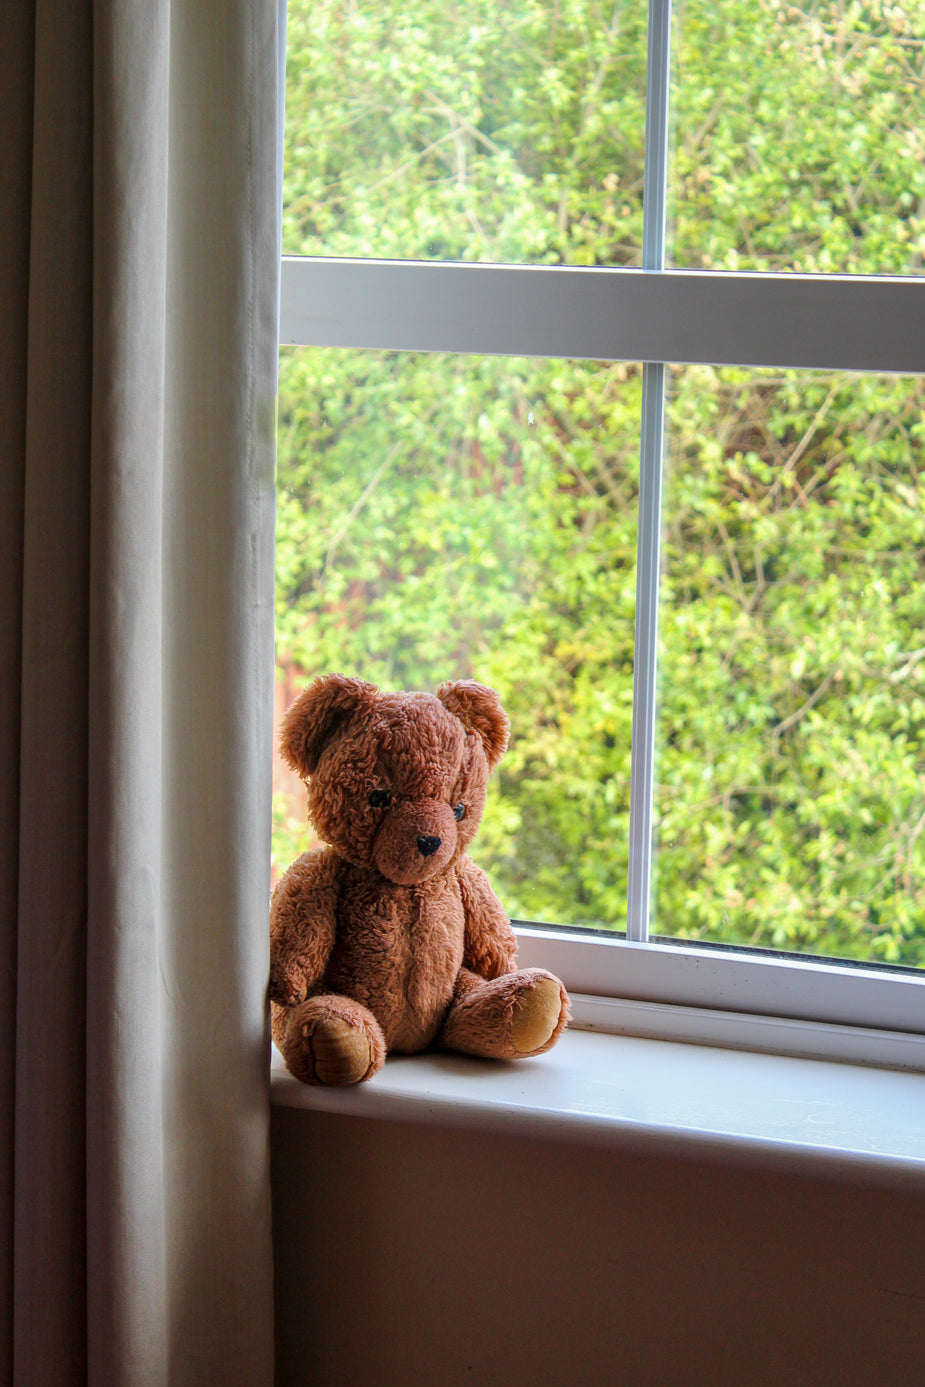 Browse Free HD Images of Lone Brown Teddy Bear Sitting On Window Ledge